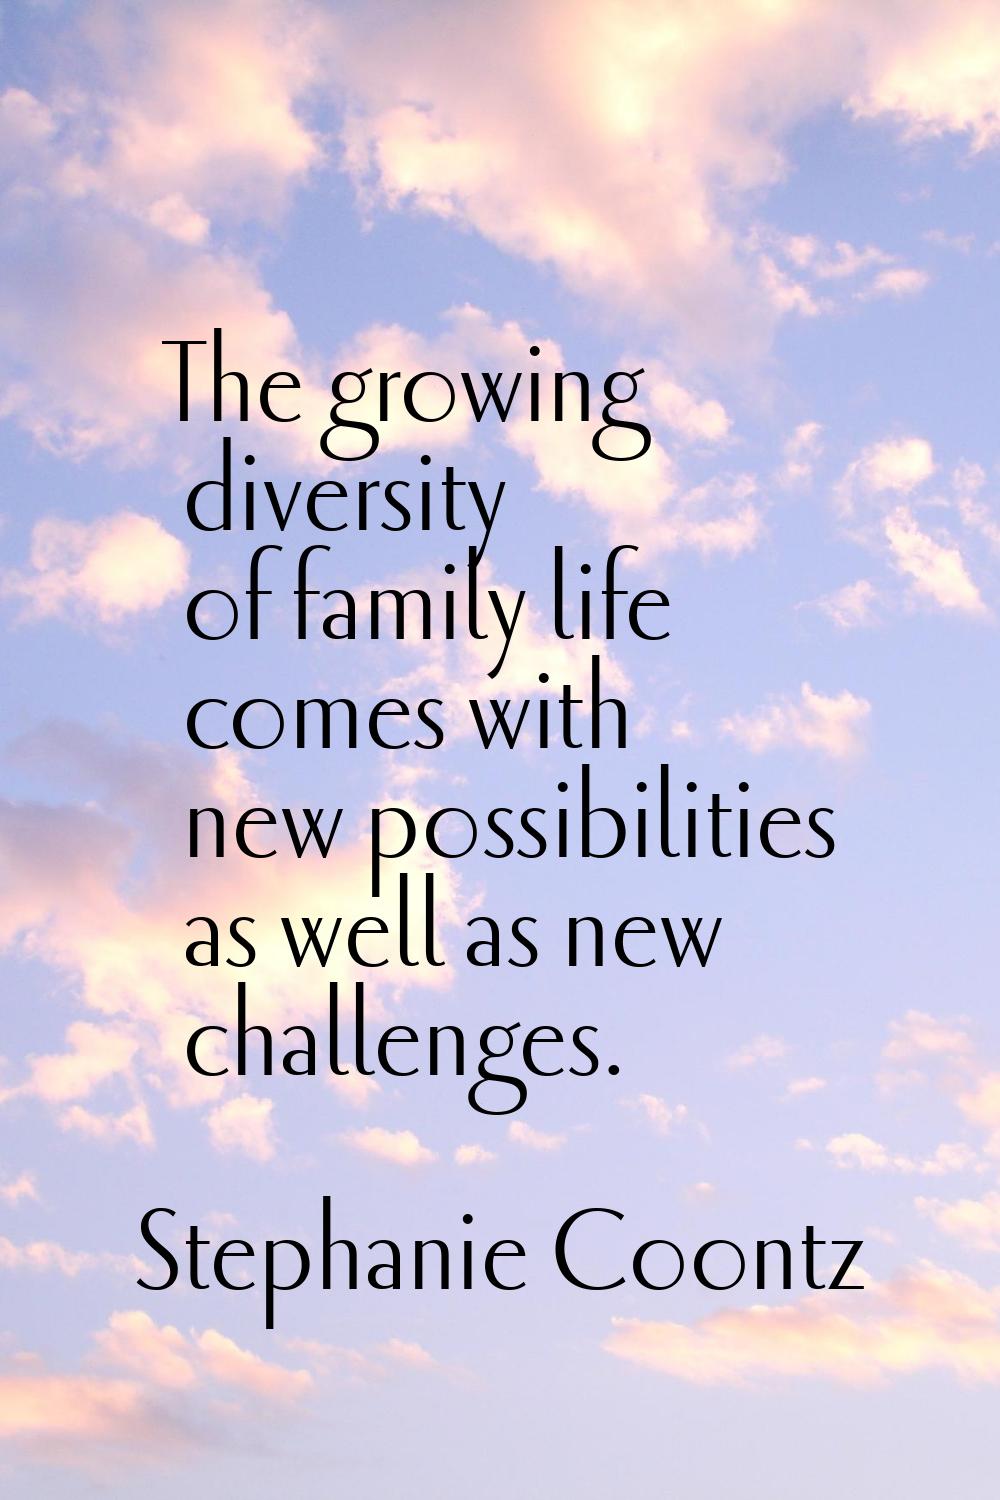 The growing diversity of family life comes with new possibilities as well as new challenges.